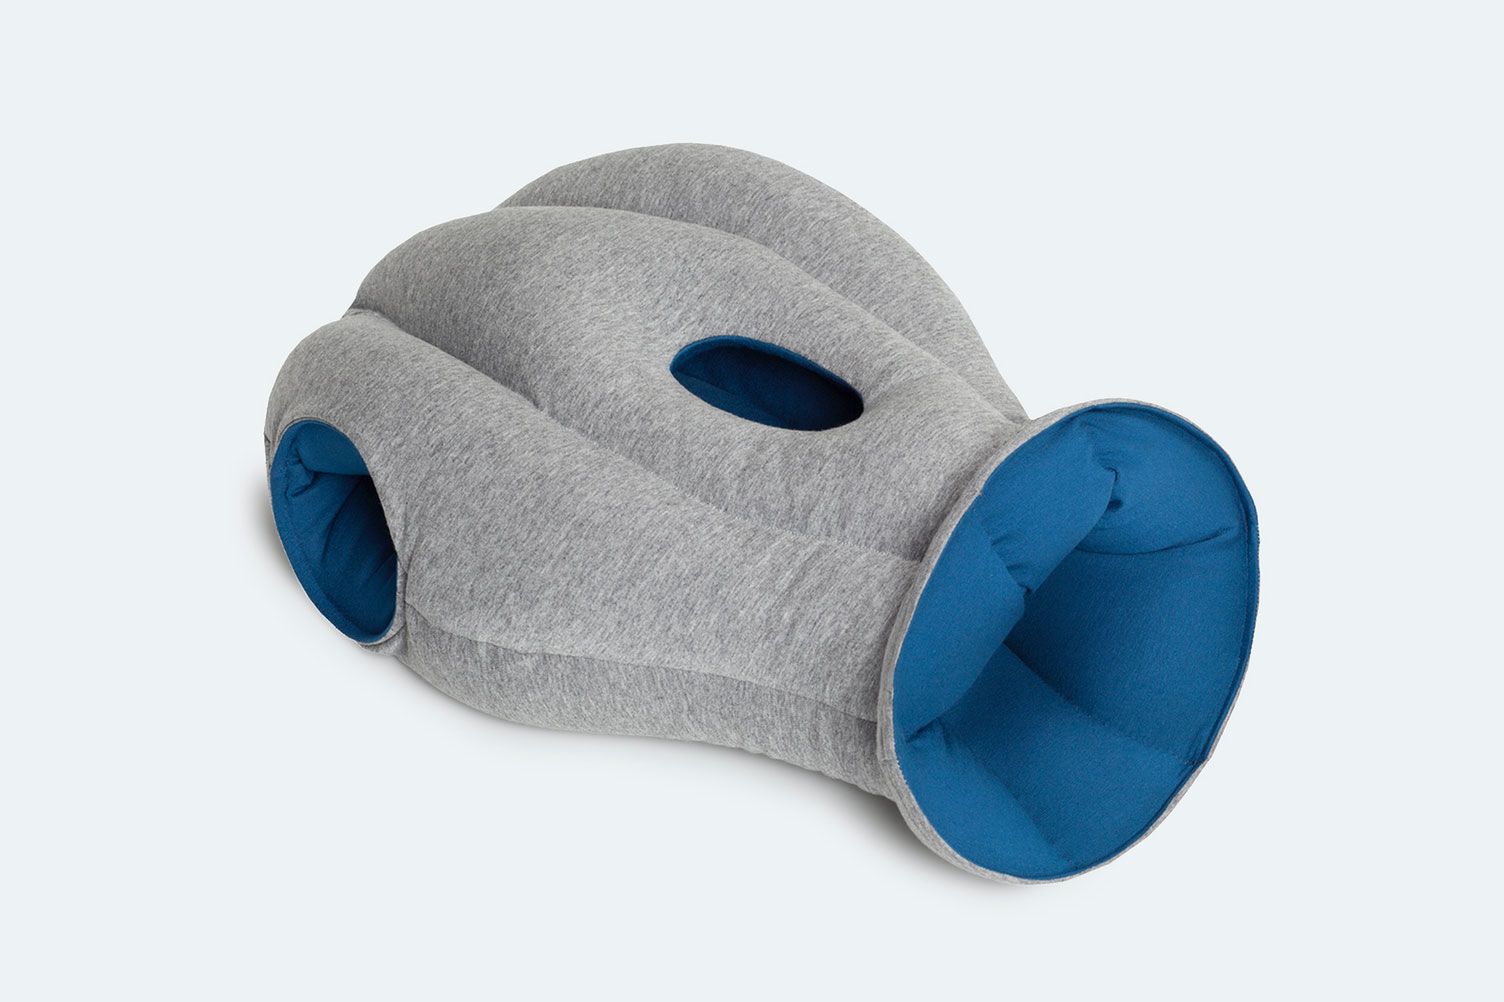 We tried this crazy travel pillow with over 10,000 reviews